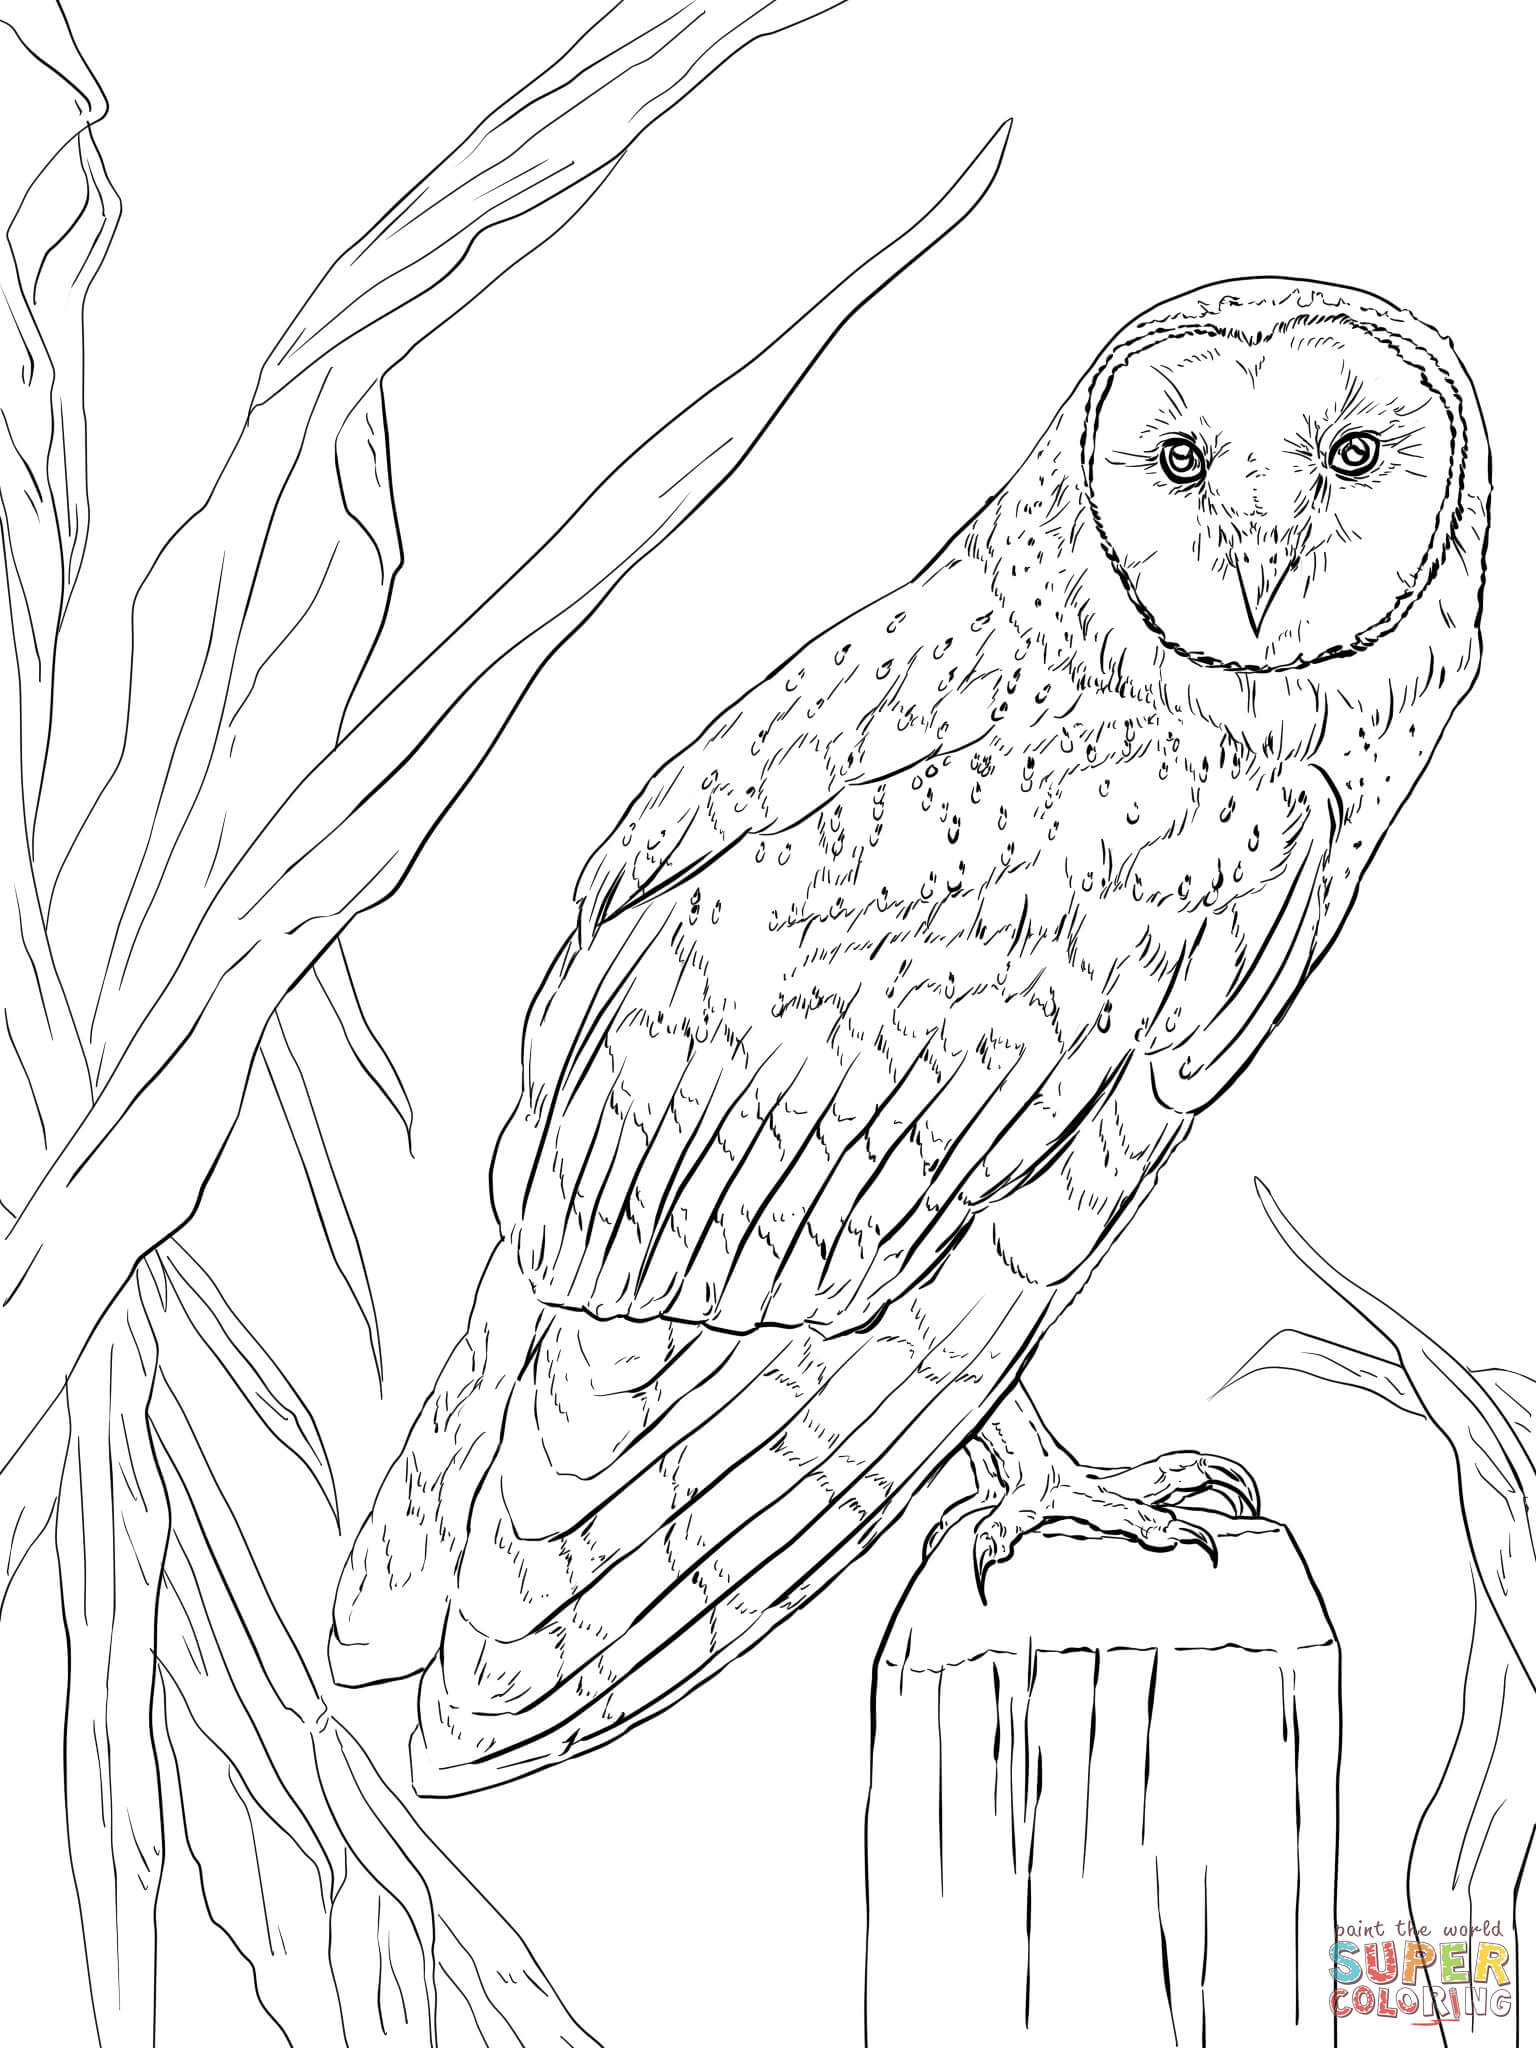 Barn Owl Coloring Page | Free Printable Coloring Pages - Free Printable Barn Coloring Pages